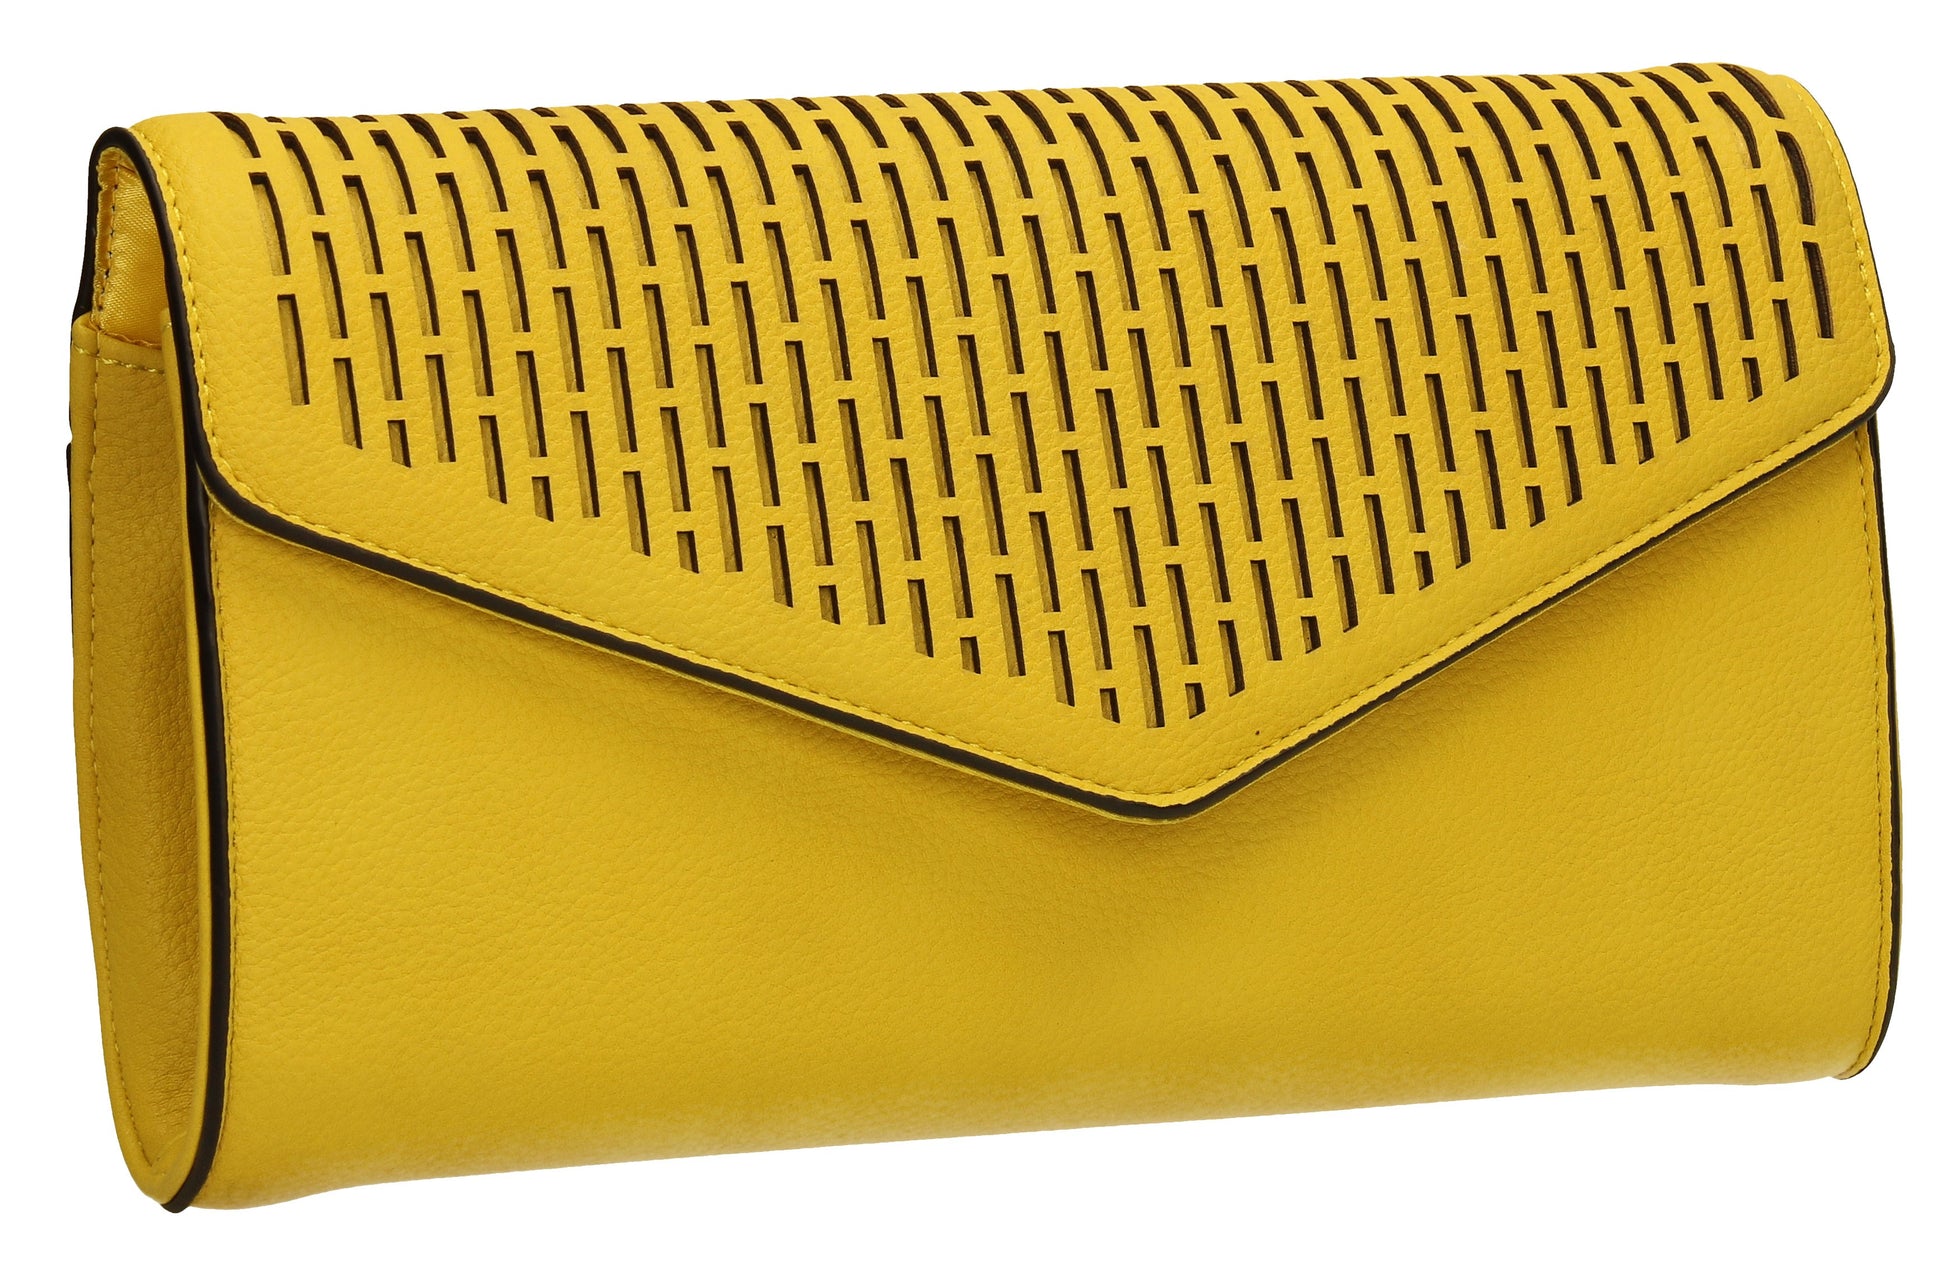 SWANKYSWANS Andrea Clutch Bag Yellow Cute Cheap Clutch Bag For Weddings School and Work